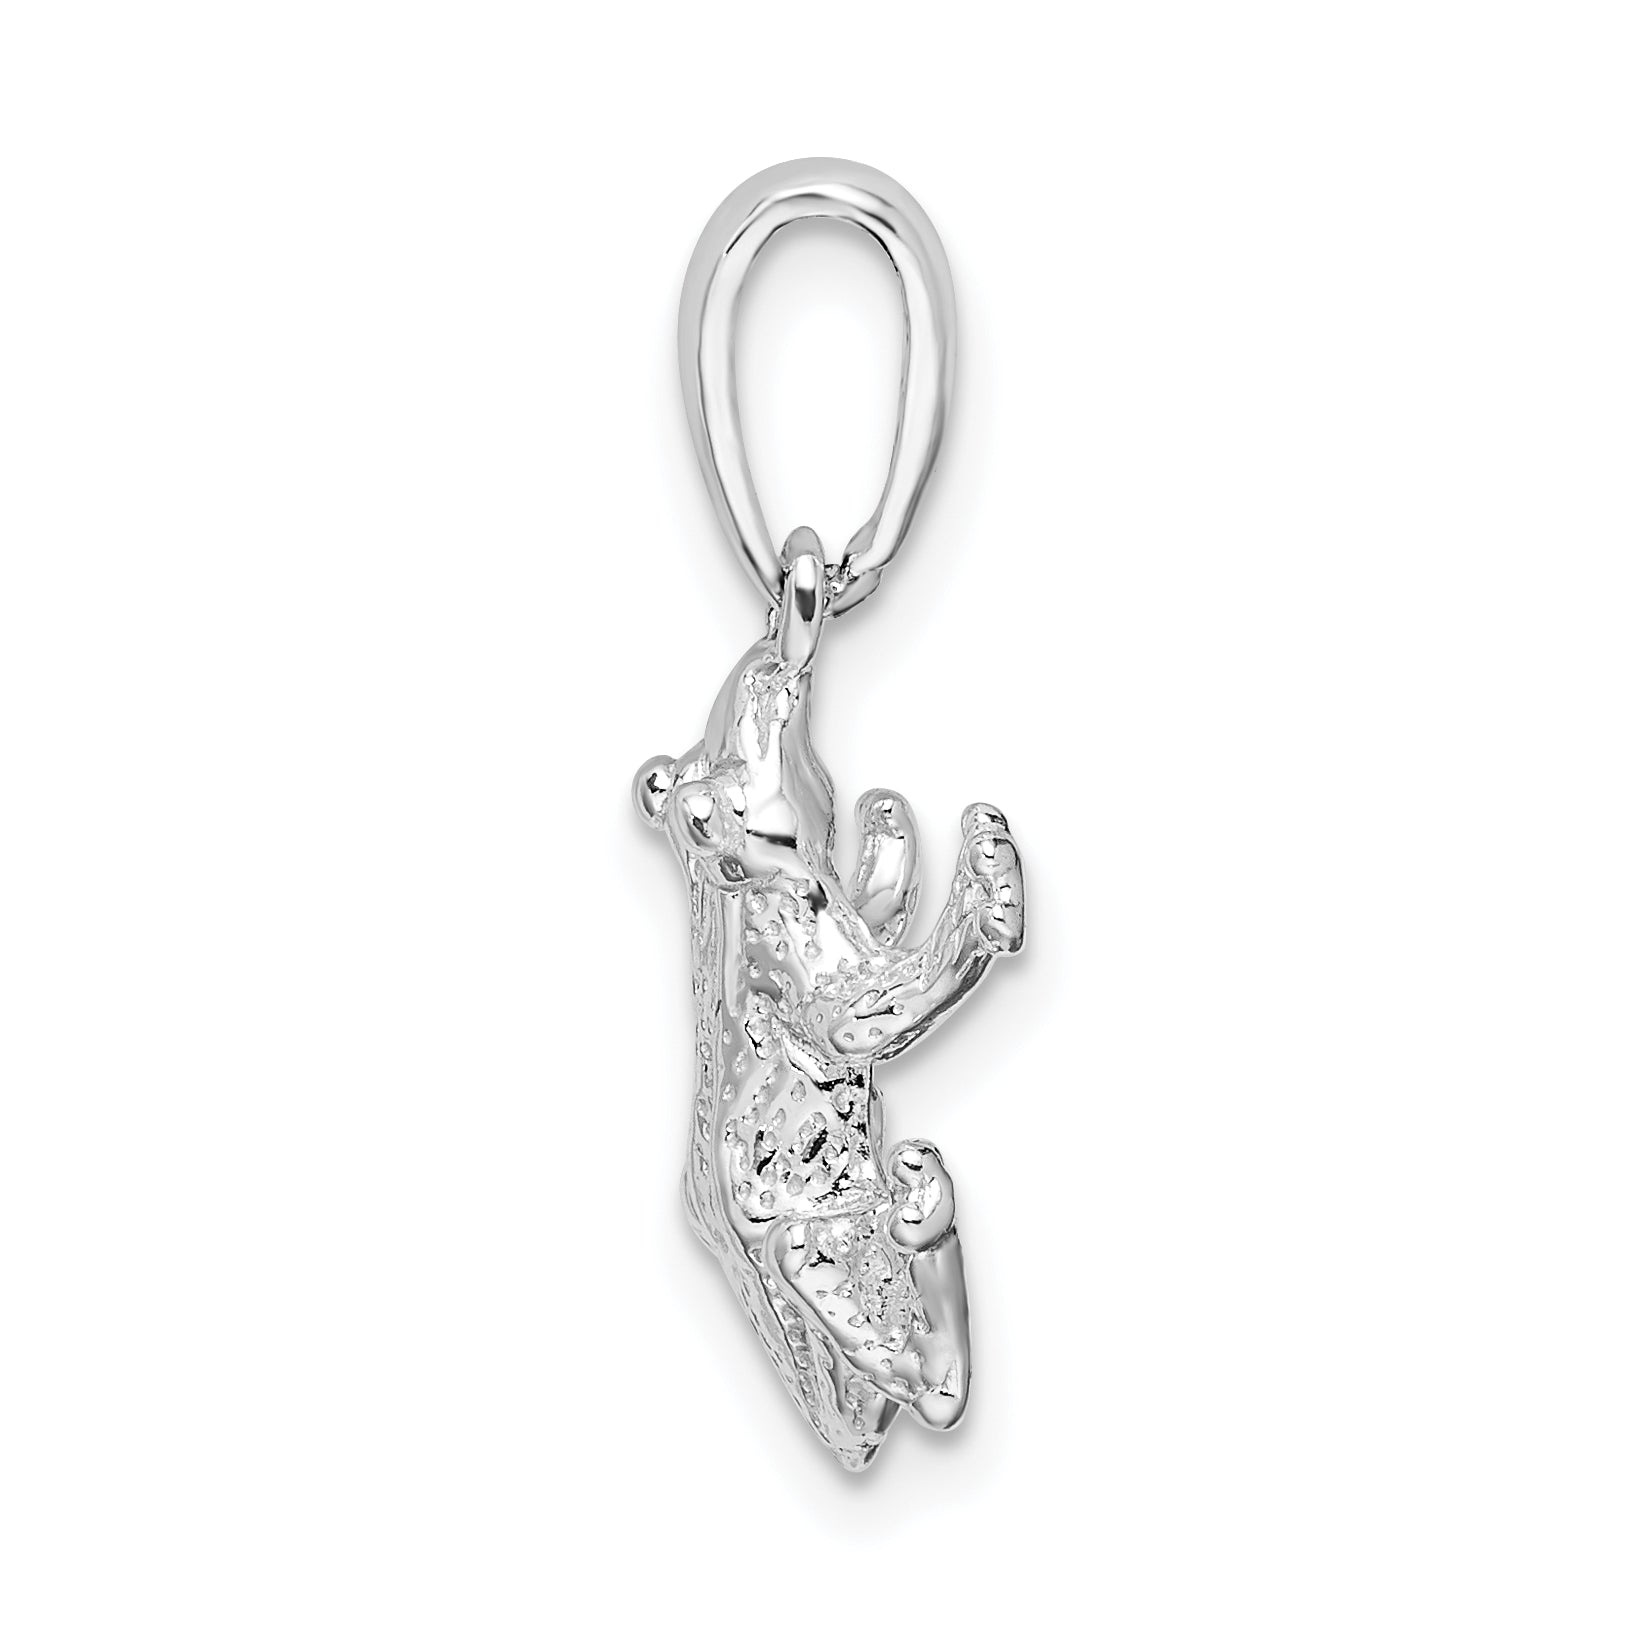 De-Ani Sterling Silver Rhodium-Plated Polished Frog Pendant